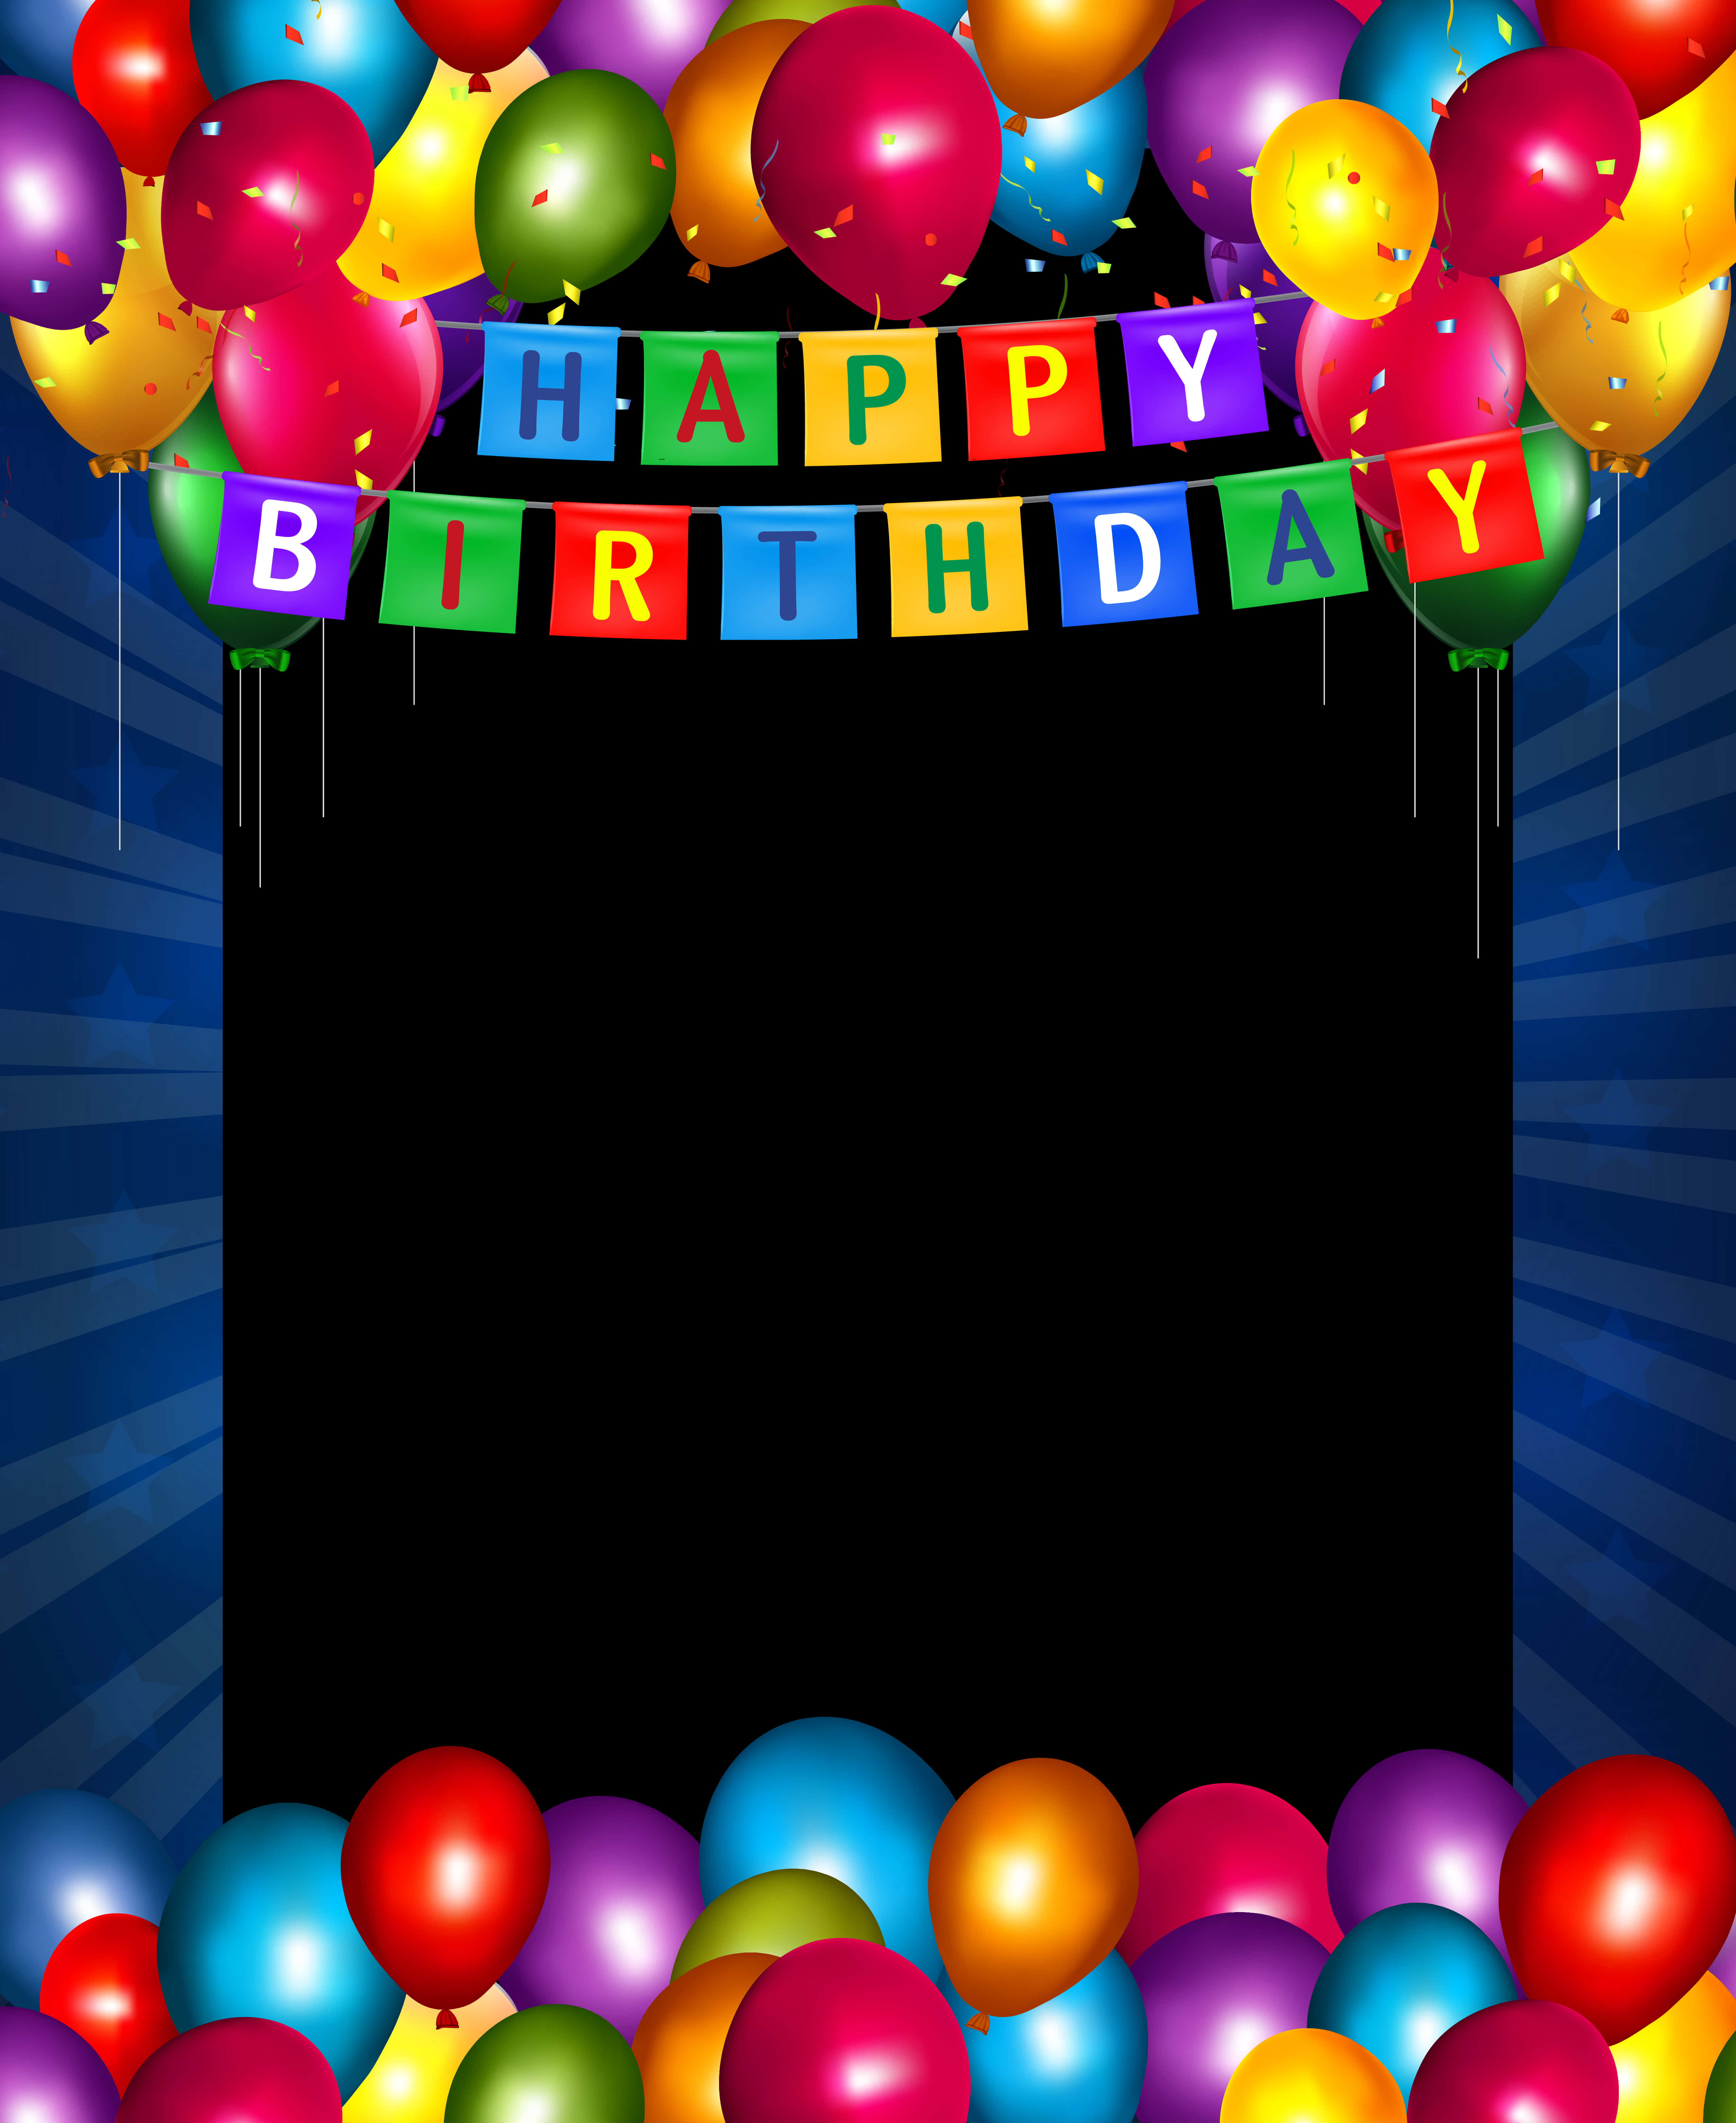 A Birthday Card With Balloons And A Black Background